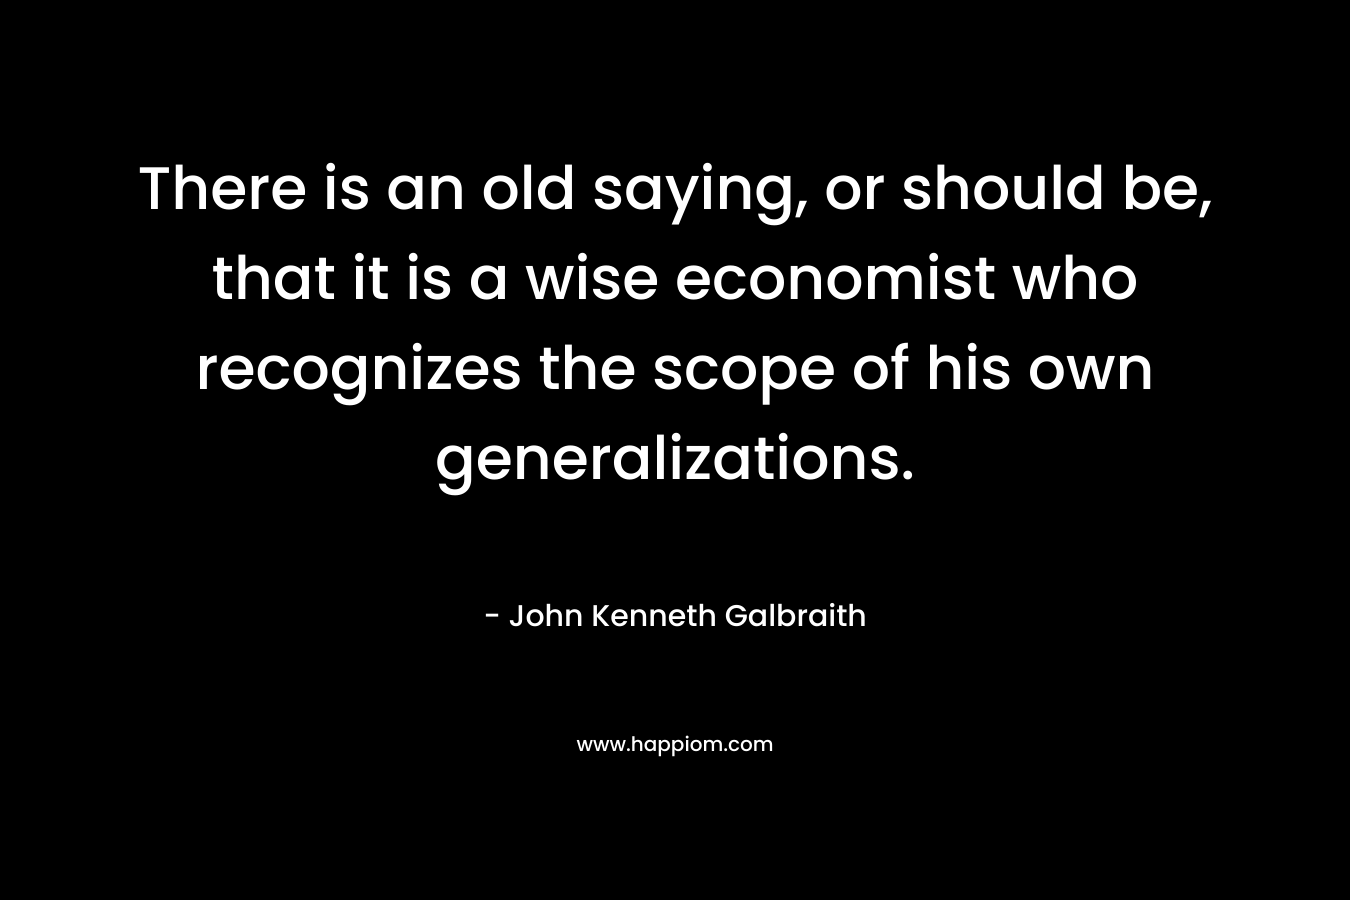 There is an old saying, or should be, that it is a wise economist who recognizes the scope of his own generalizations. – John Kenneth Galbraith